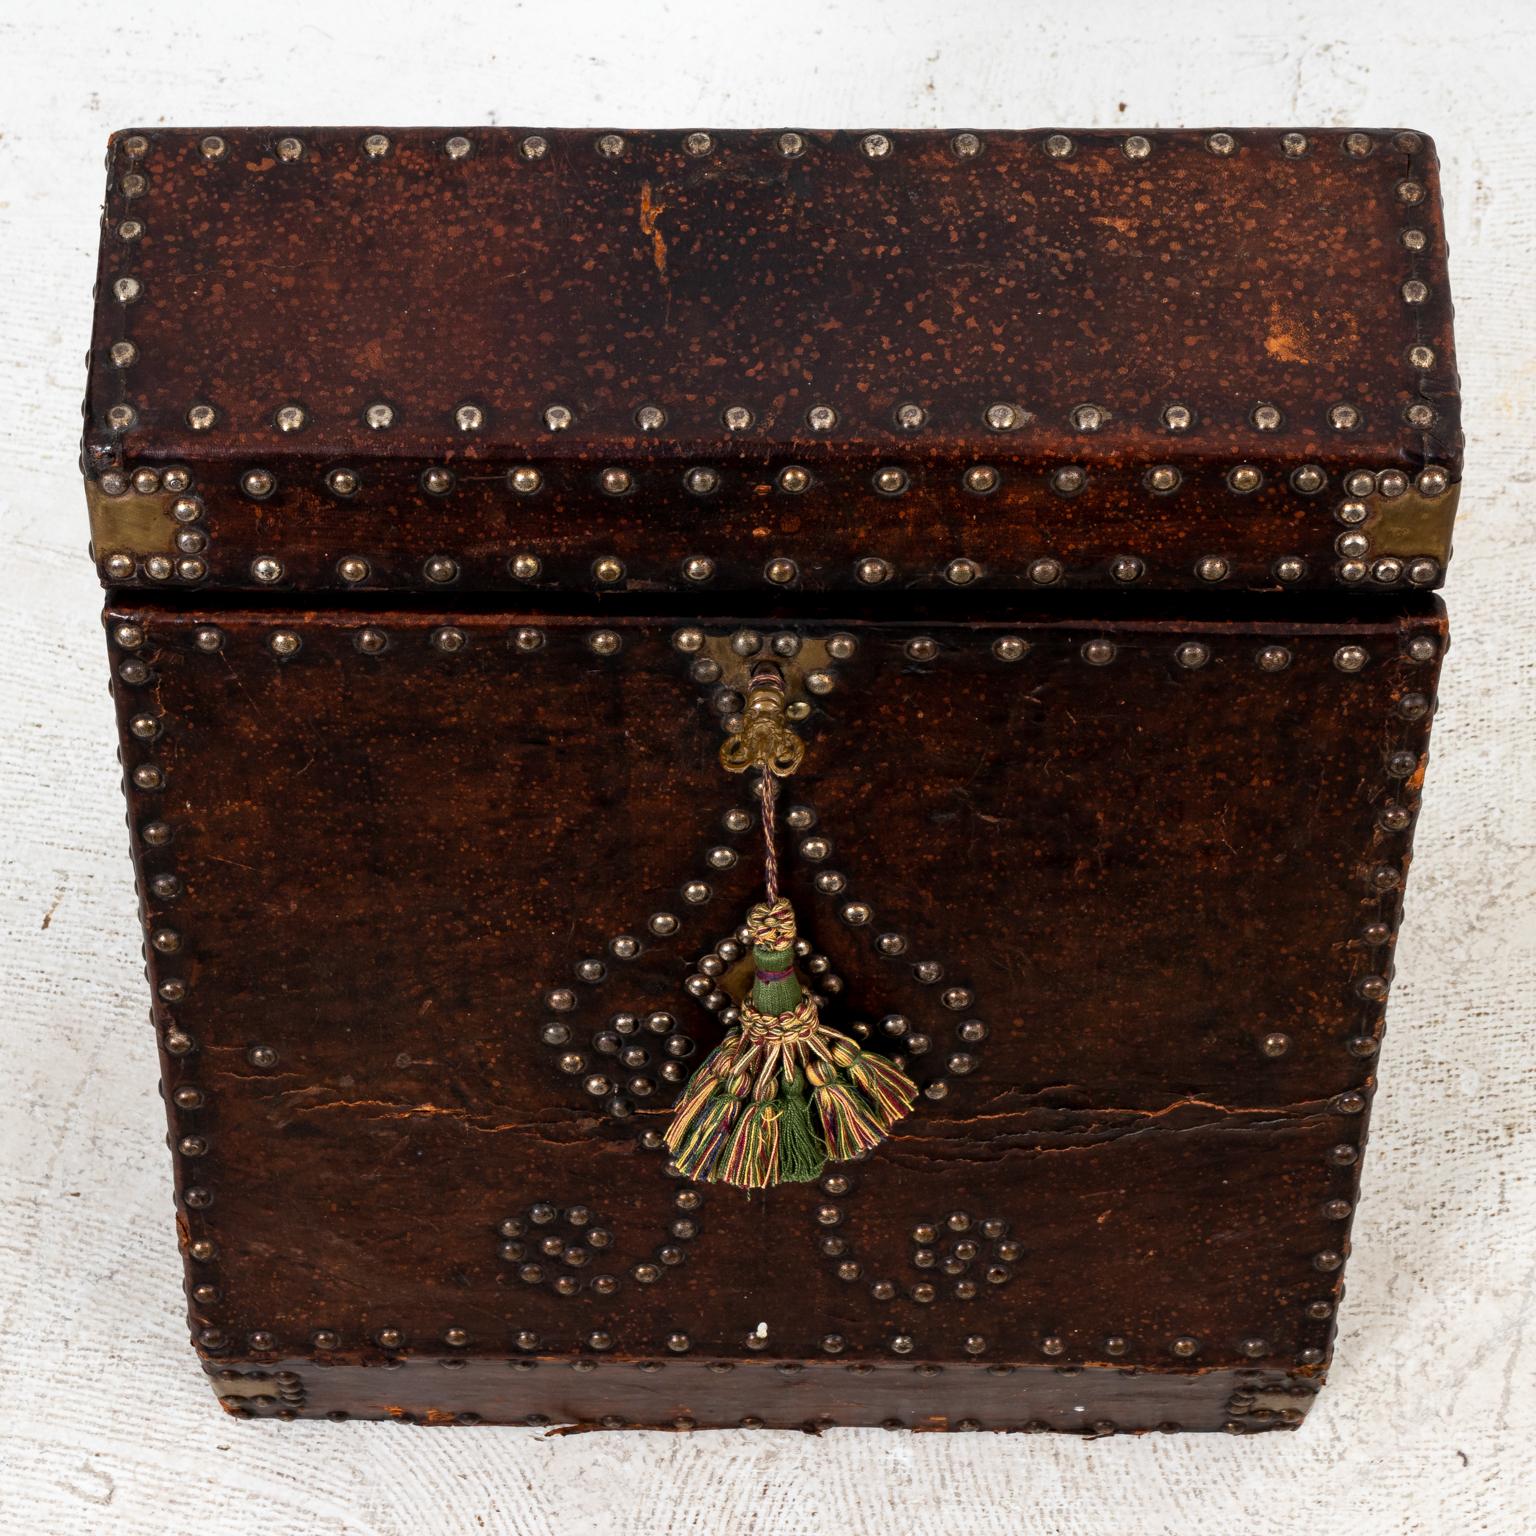 Early 20th Century Leather and Nail Head Decorated Letter Box from Spain